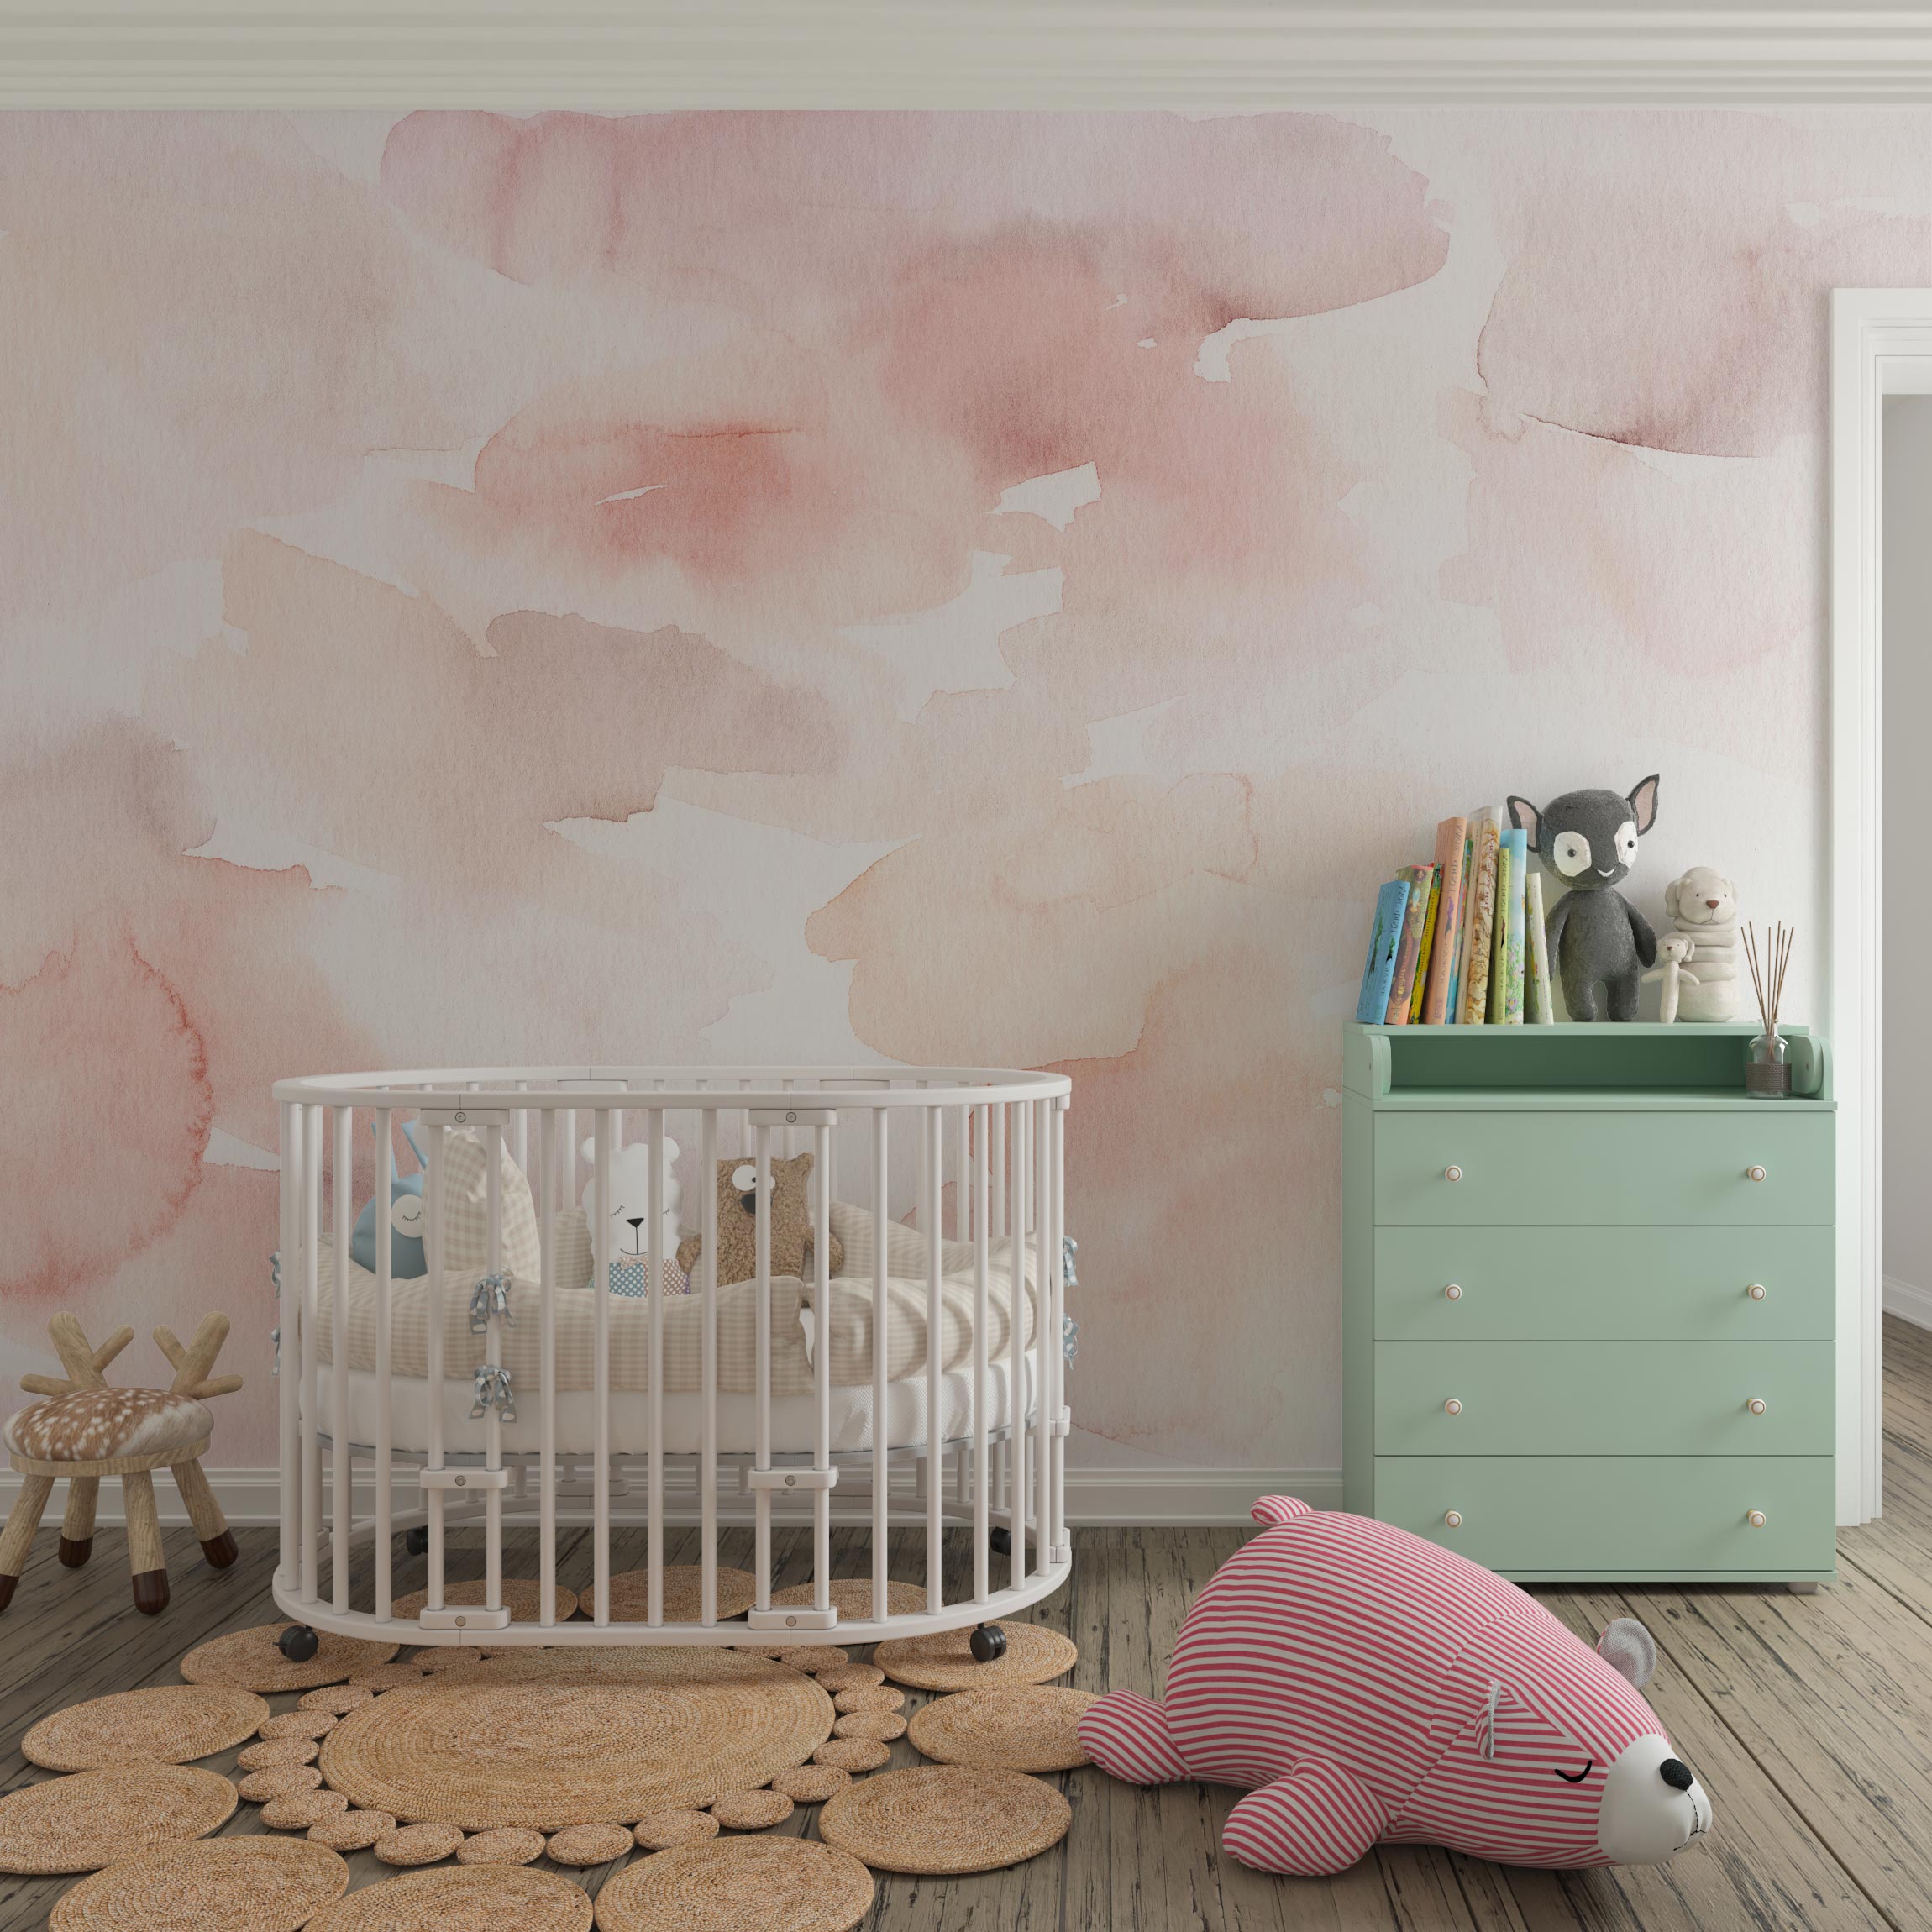 Baby Wall Paintings, Baby Wall Pictures, Baby Pink Painting